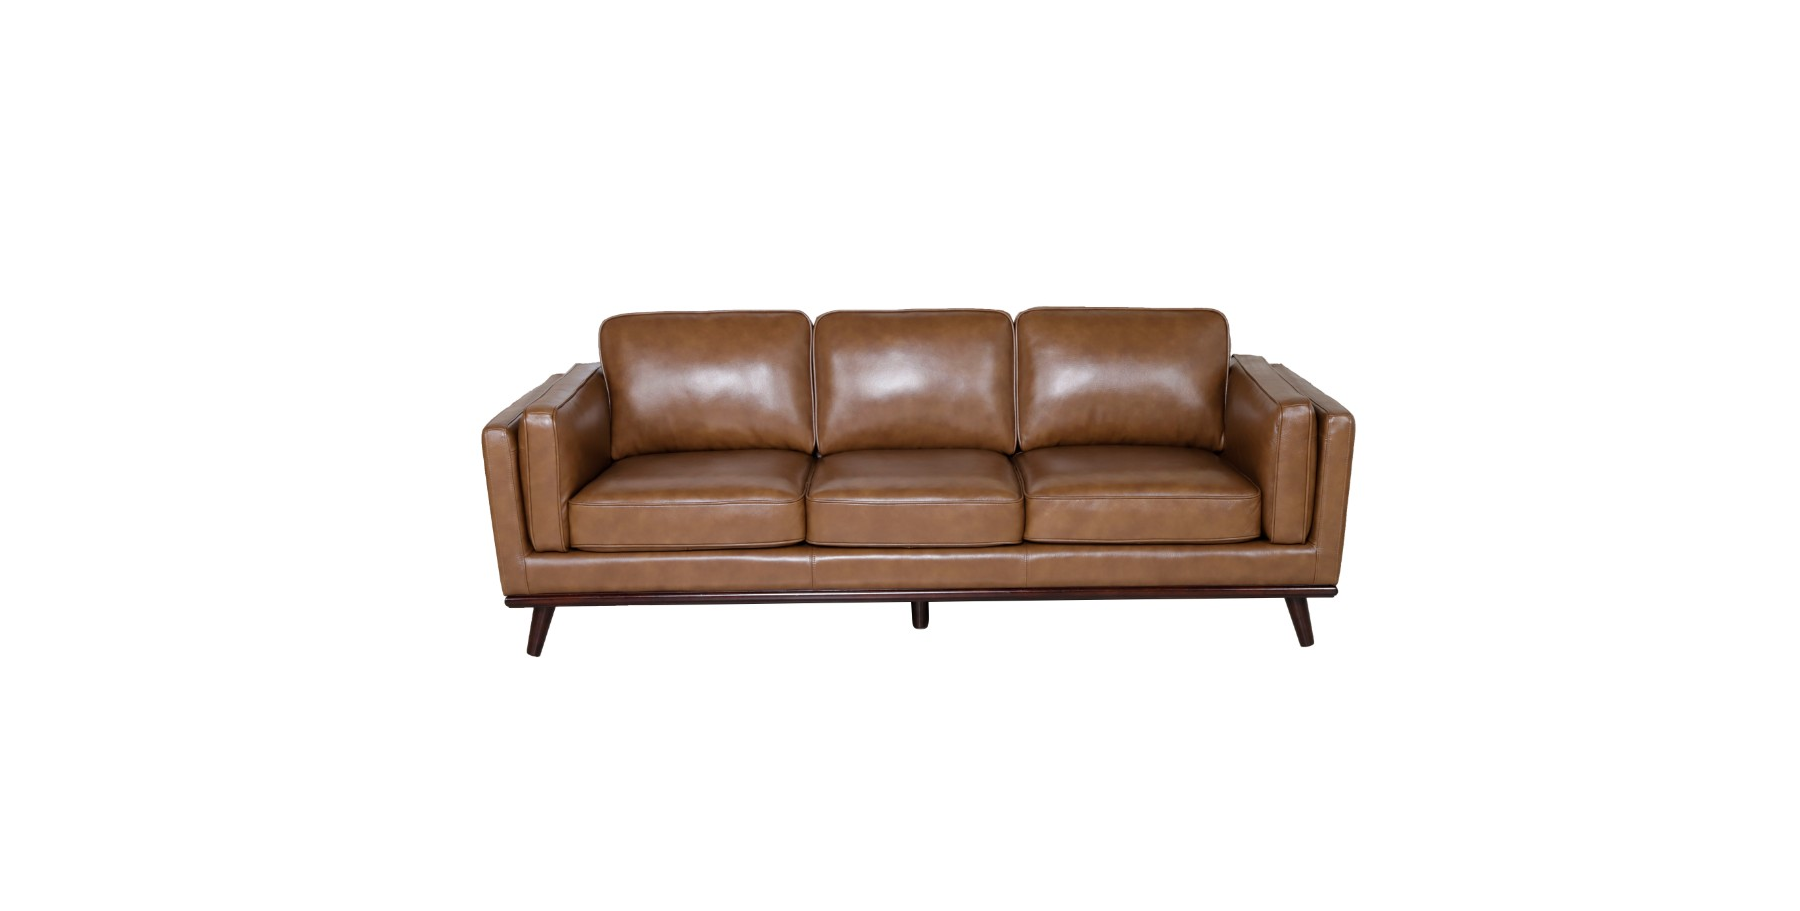 Riley Leather Sofa In Antique Handrubbed